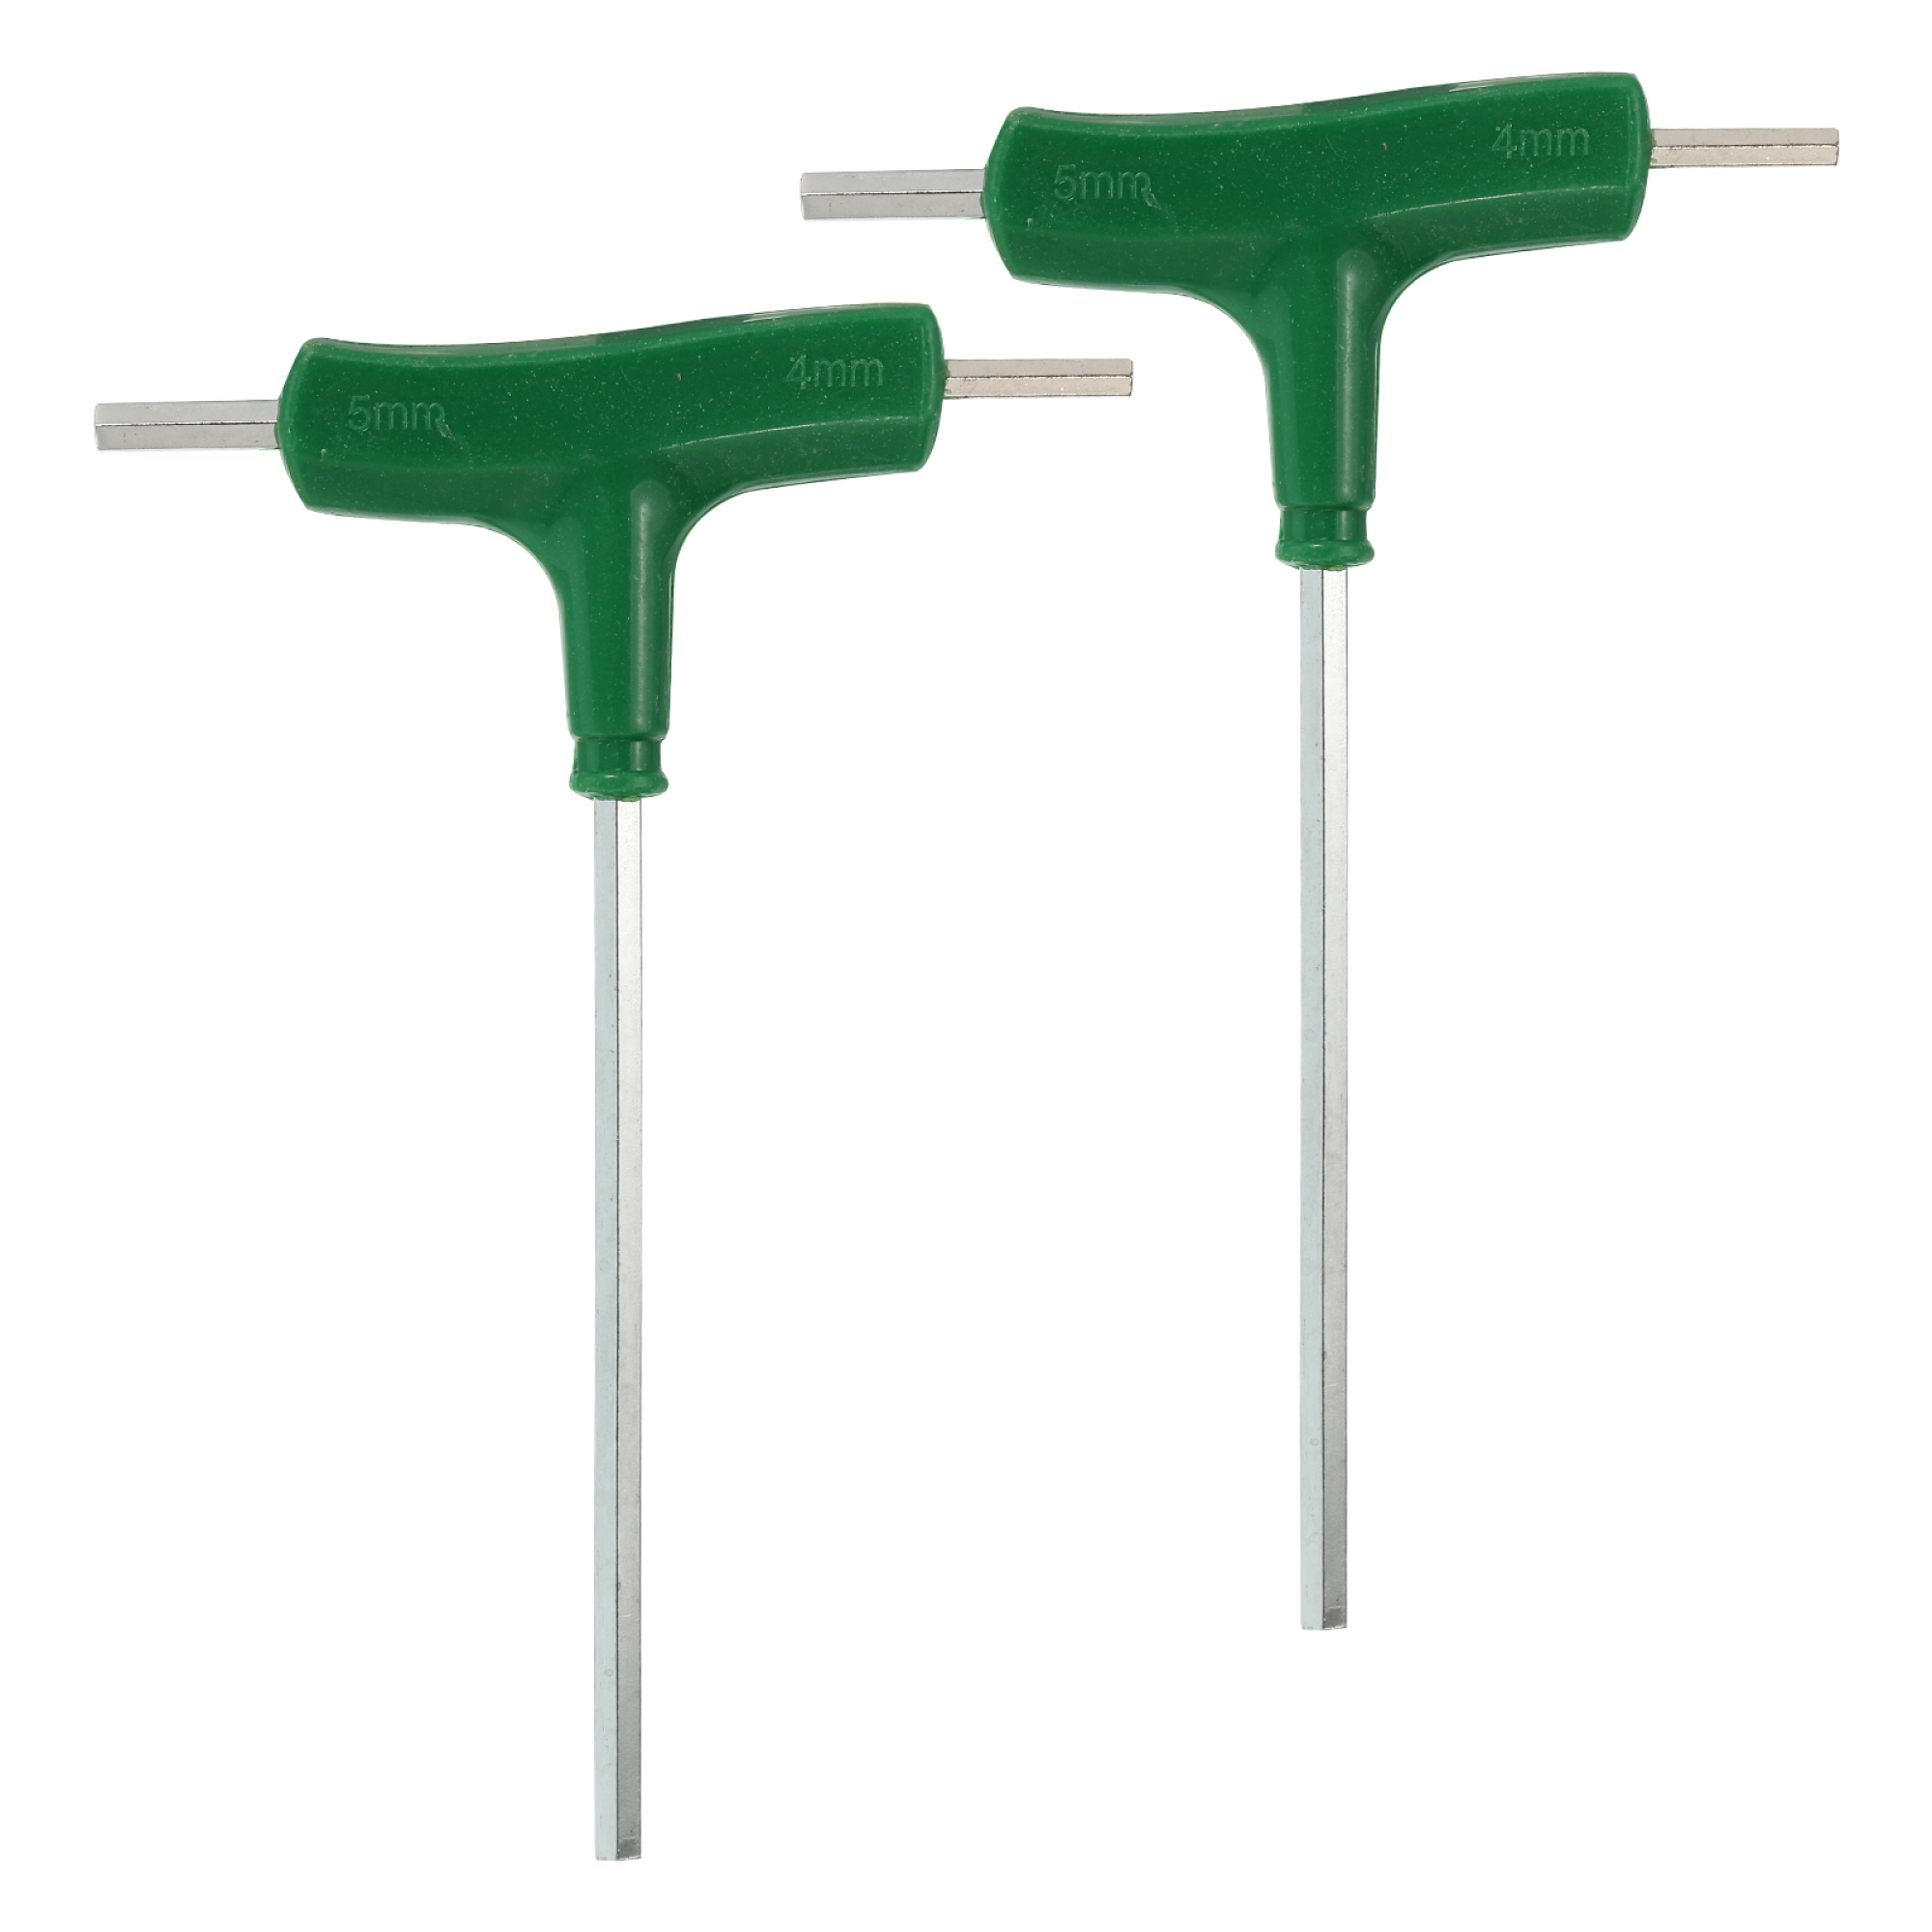 T-Handle Three-Way Hex Wrench Set 4mm/5mm, Green